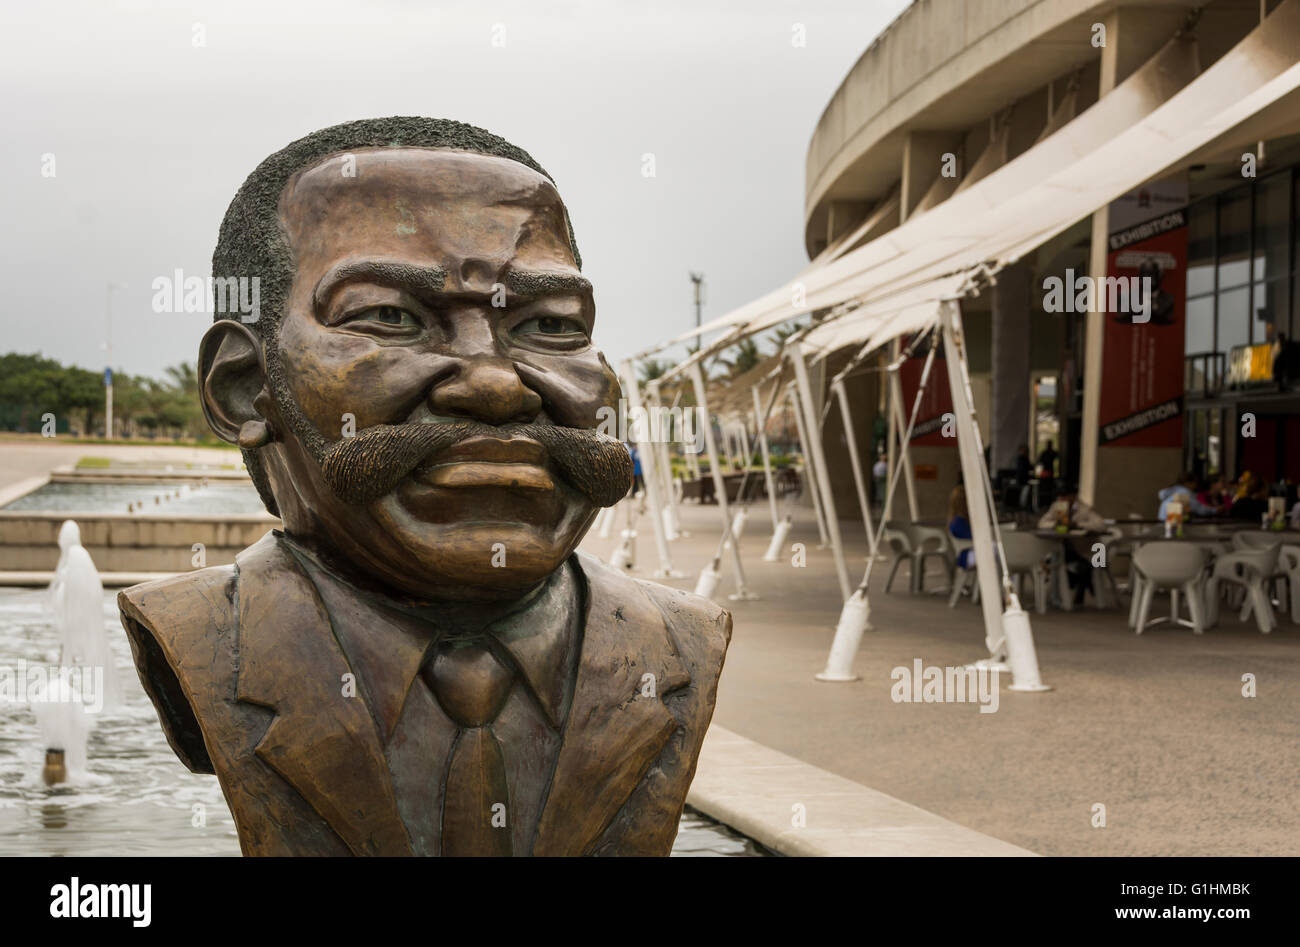 Bronze head statue of Moses Mabhida outside the stadium named after him in Durban, KwaZulu Natal, South Africa Stock Photo